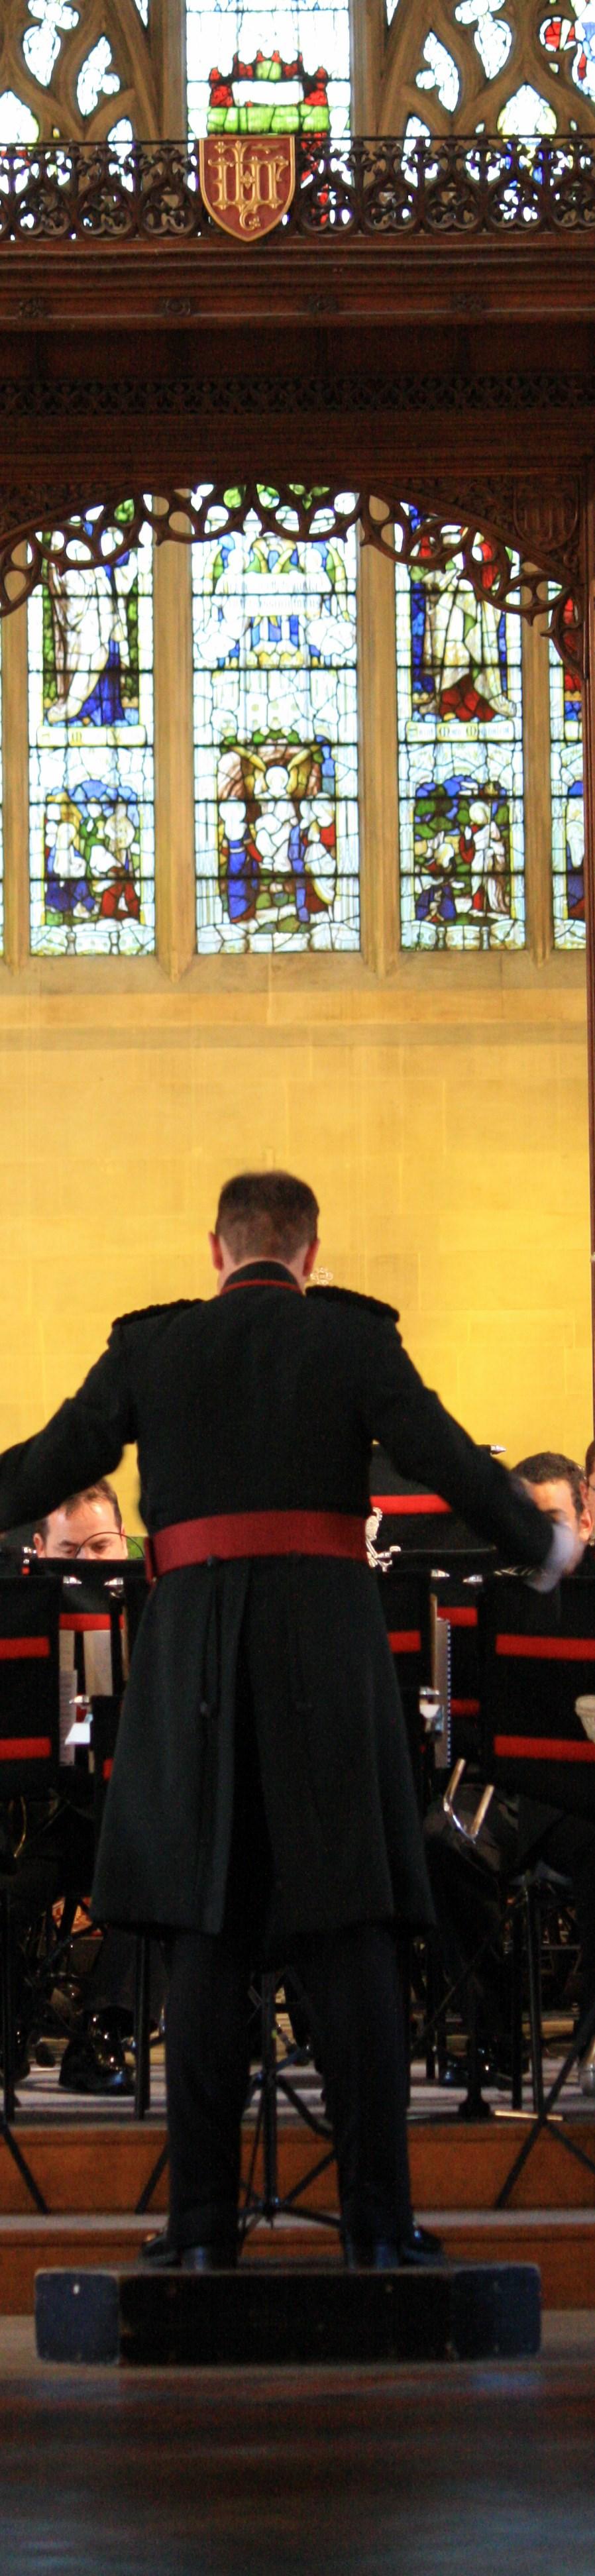 Armed Forces Week Celebratory Concert St John the Divine Church, Kew Road 21 June 2017, 17:30-22:00 Each year we hold a summer concert to mark Armed Forces Week, celebrating the work of the Armed